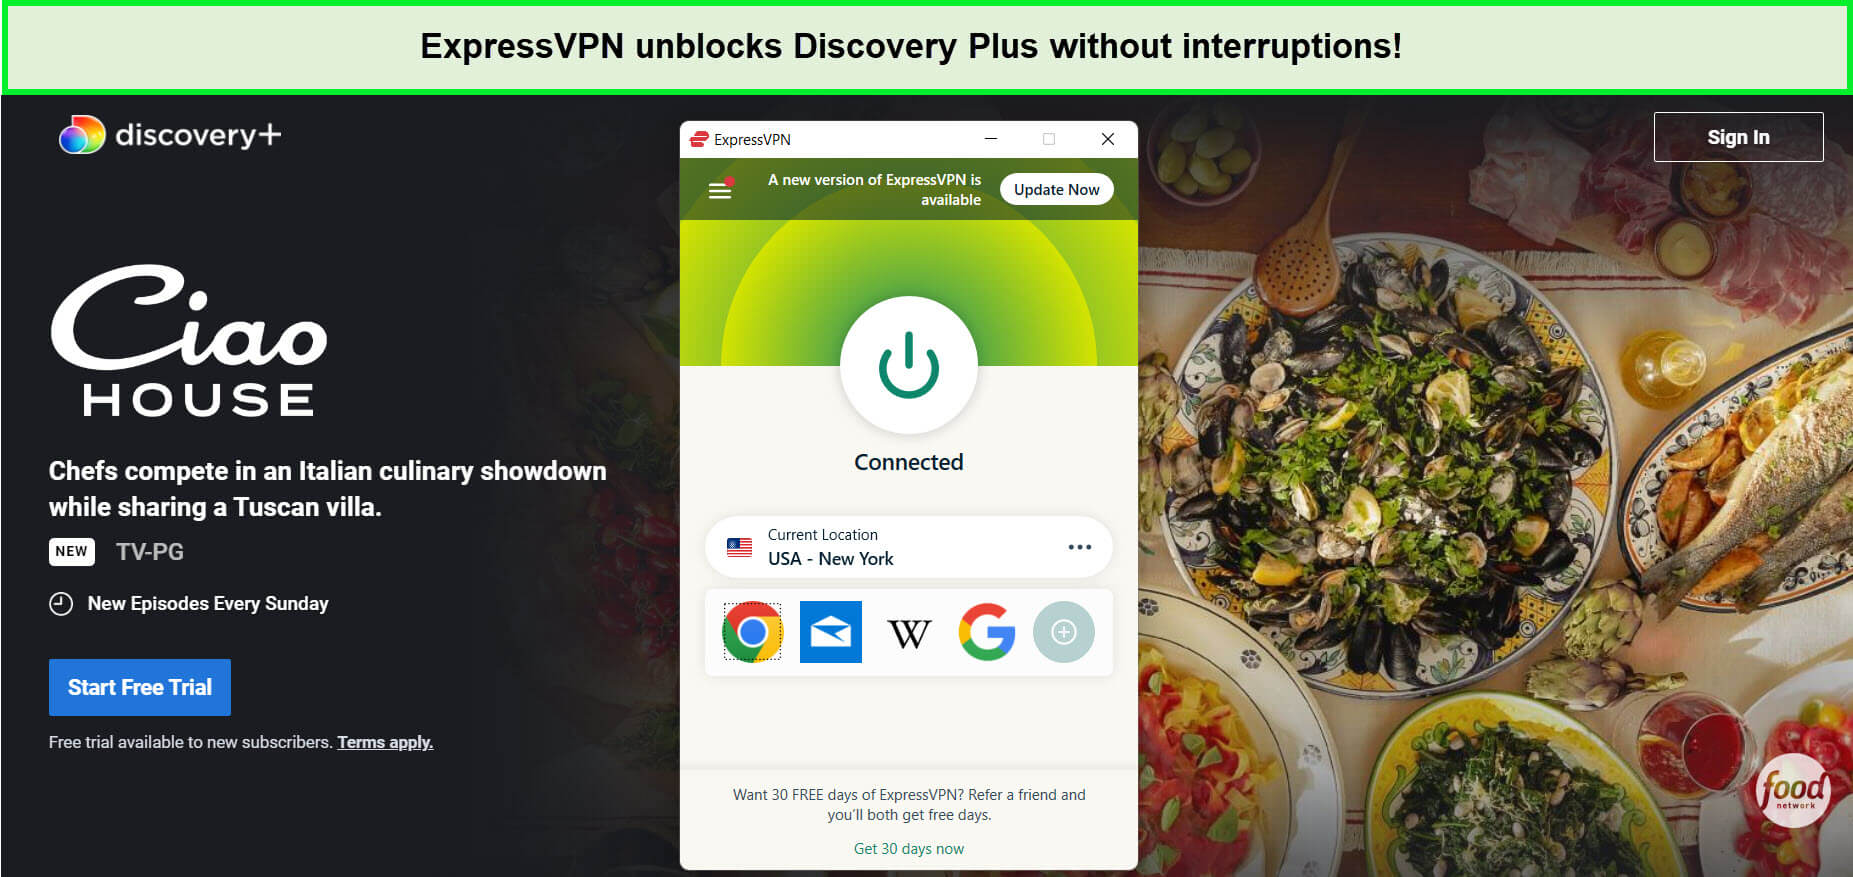 expressvpn-unblocks-ciao-house-season-one-in-Italy-on-discovery-plus